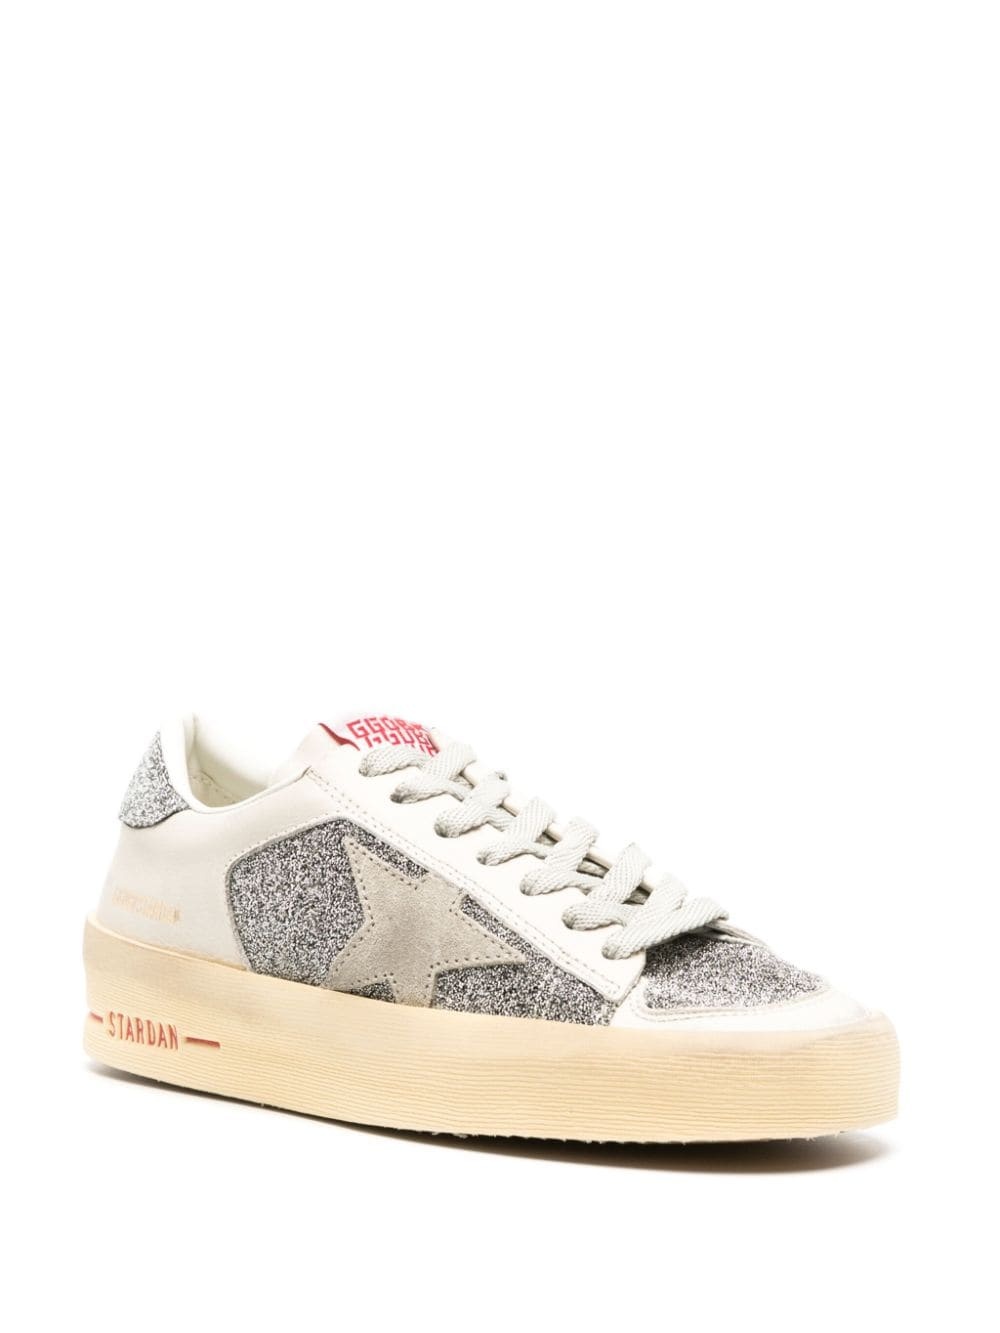 Stardan crystal-embellished leather sneakers - 2